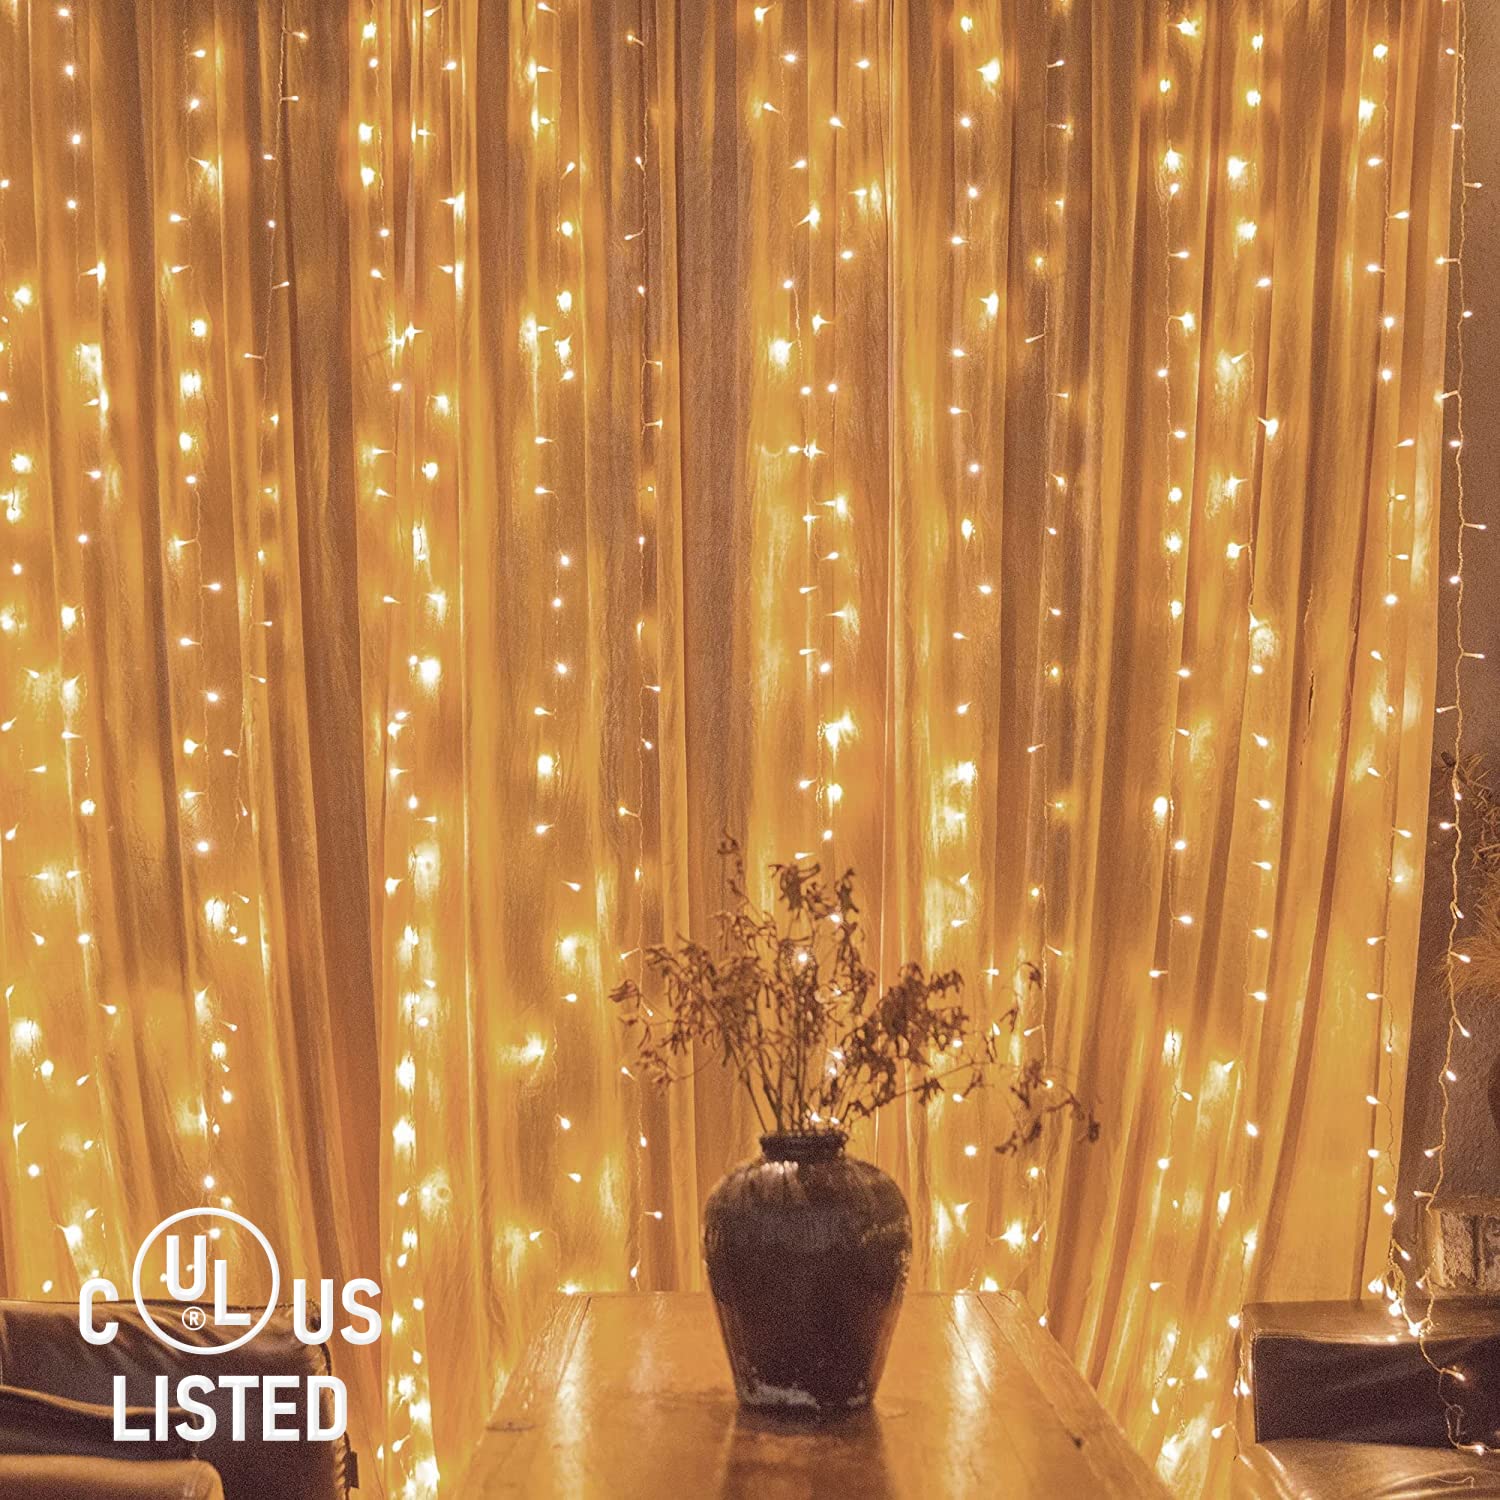 Twinkle Star 300 LED Window Curtain String Lights Wedding Party Home Garden Bedroom Outdoor Indoor Wall Decorations, Warm White